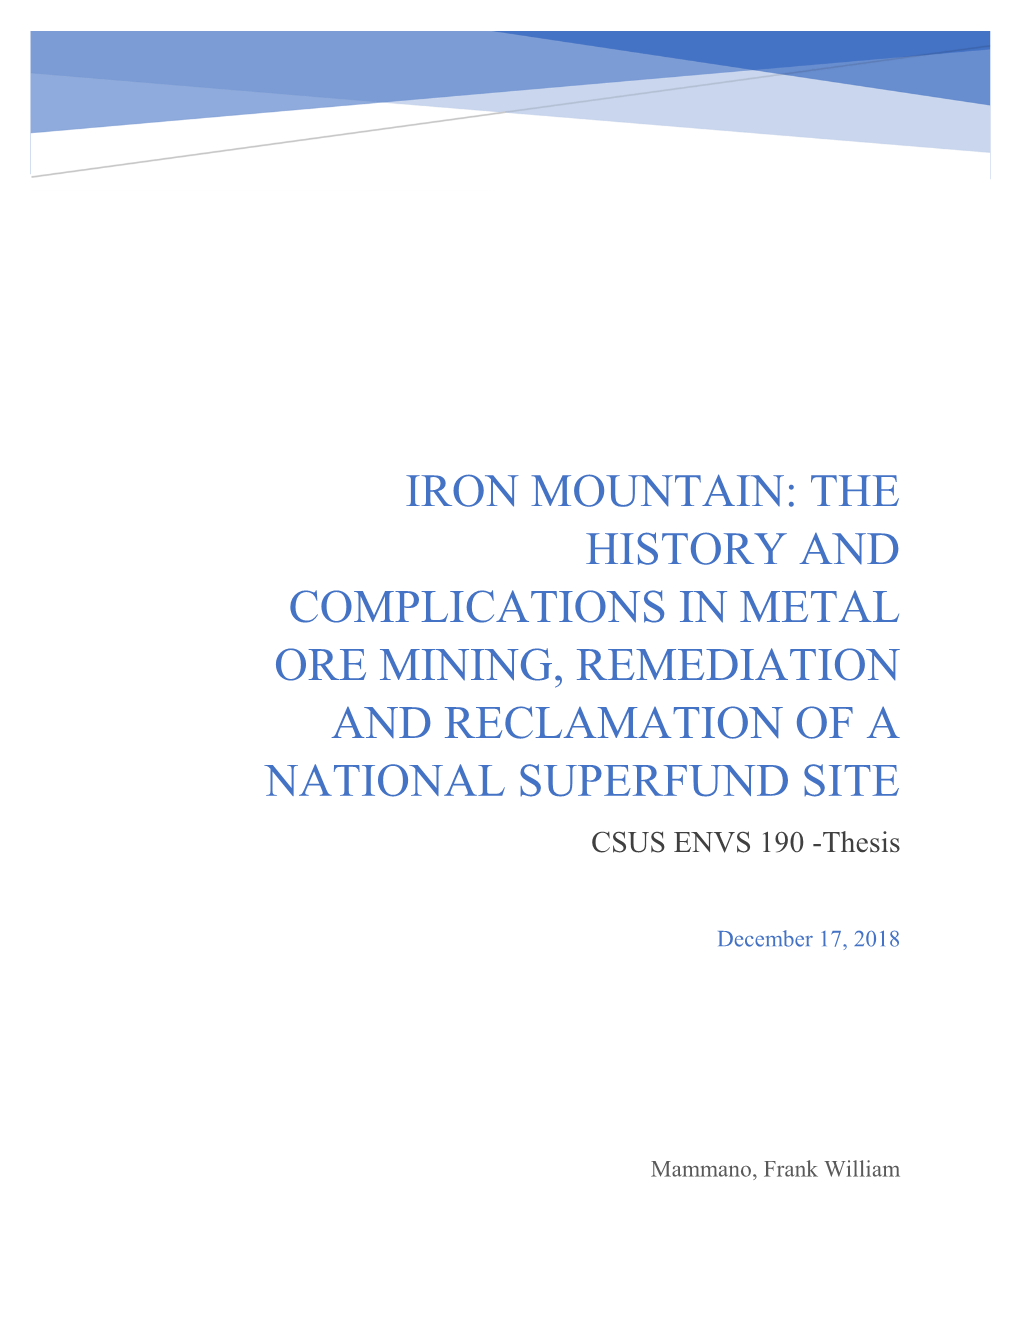 IRON MOUNTAIN: the HISTORY and COMPLICATIONS in METAL ORE MINING, REMEDIATION and RECLAMATION of a NATIONAL SUPERFUND SITE CSUS ENVS 190 -Thesis